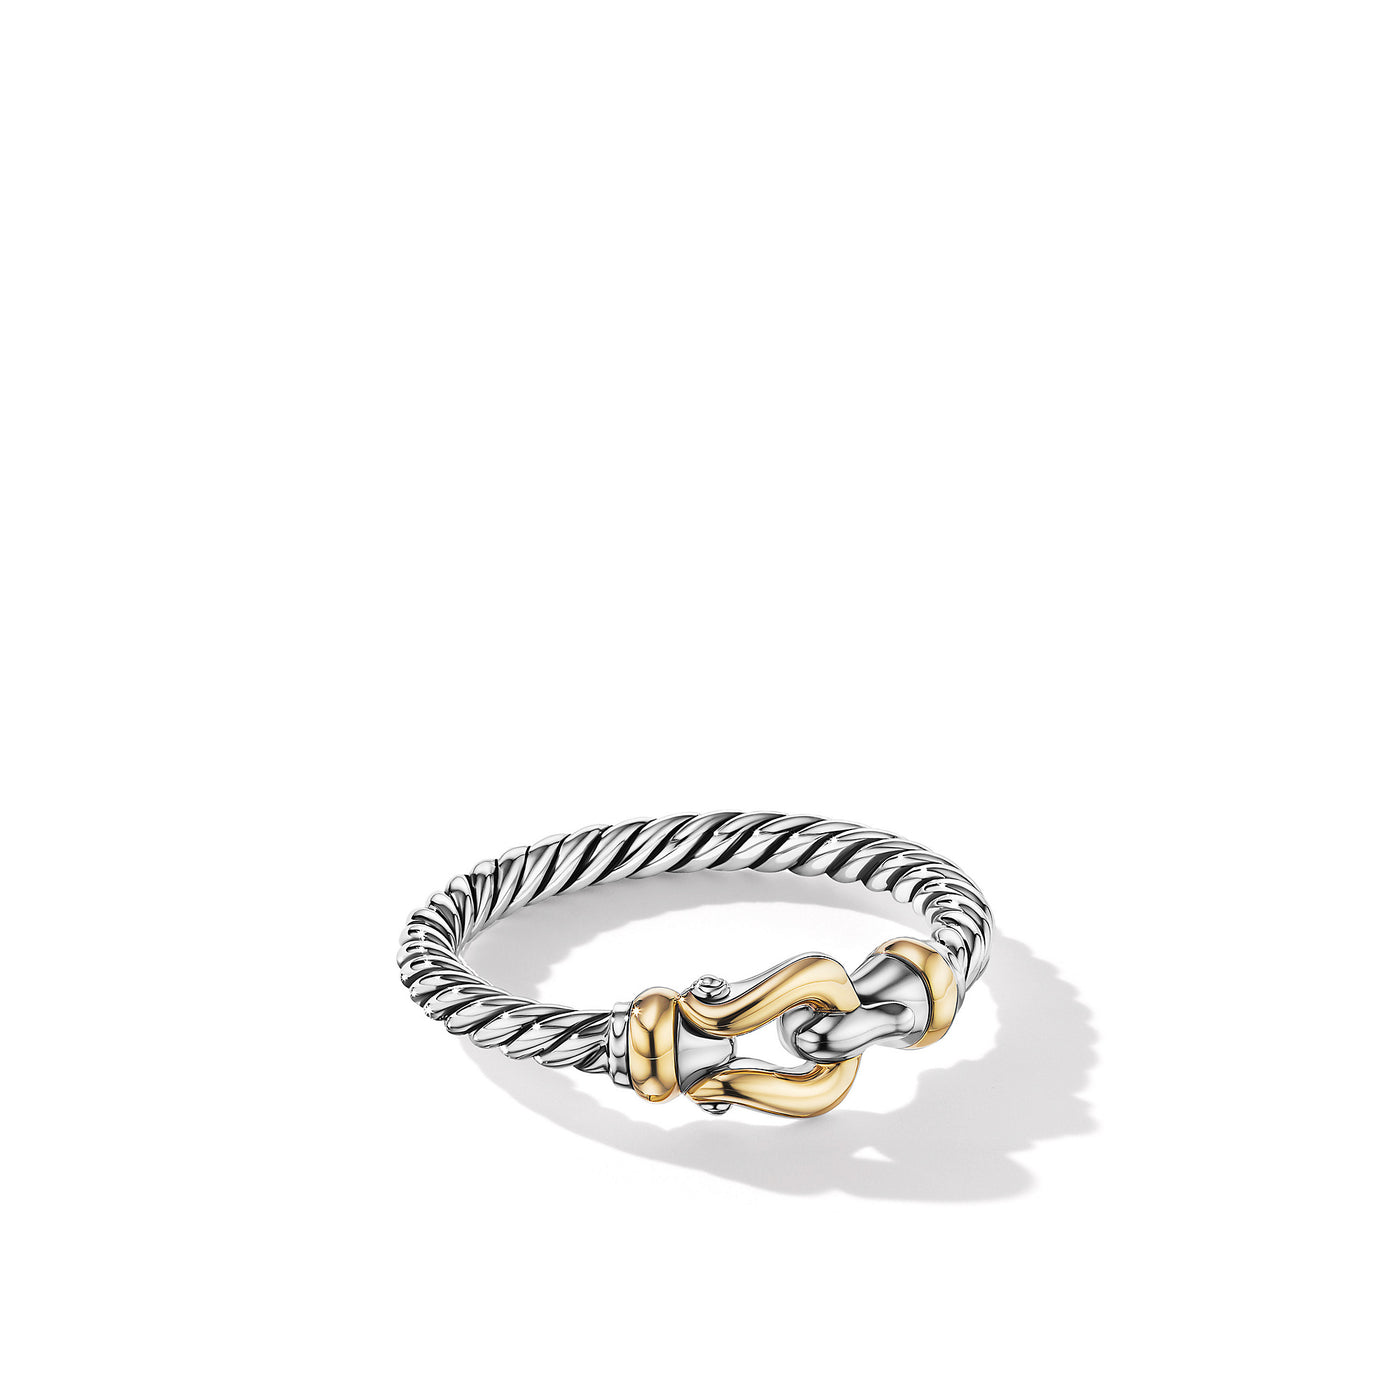 Petite Buckle Ring in Sterling Silver with 18K Yellow Gold\, 2mm